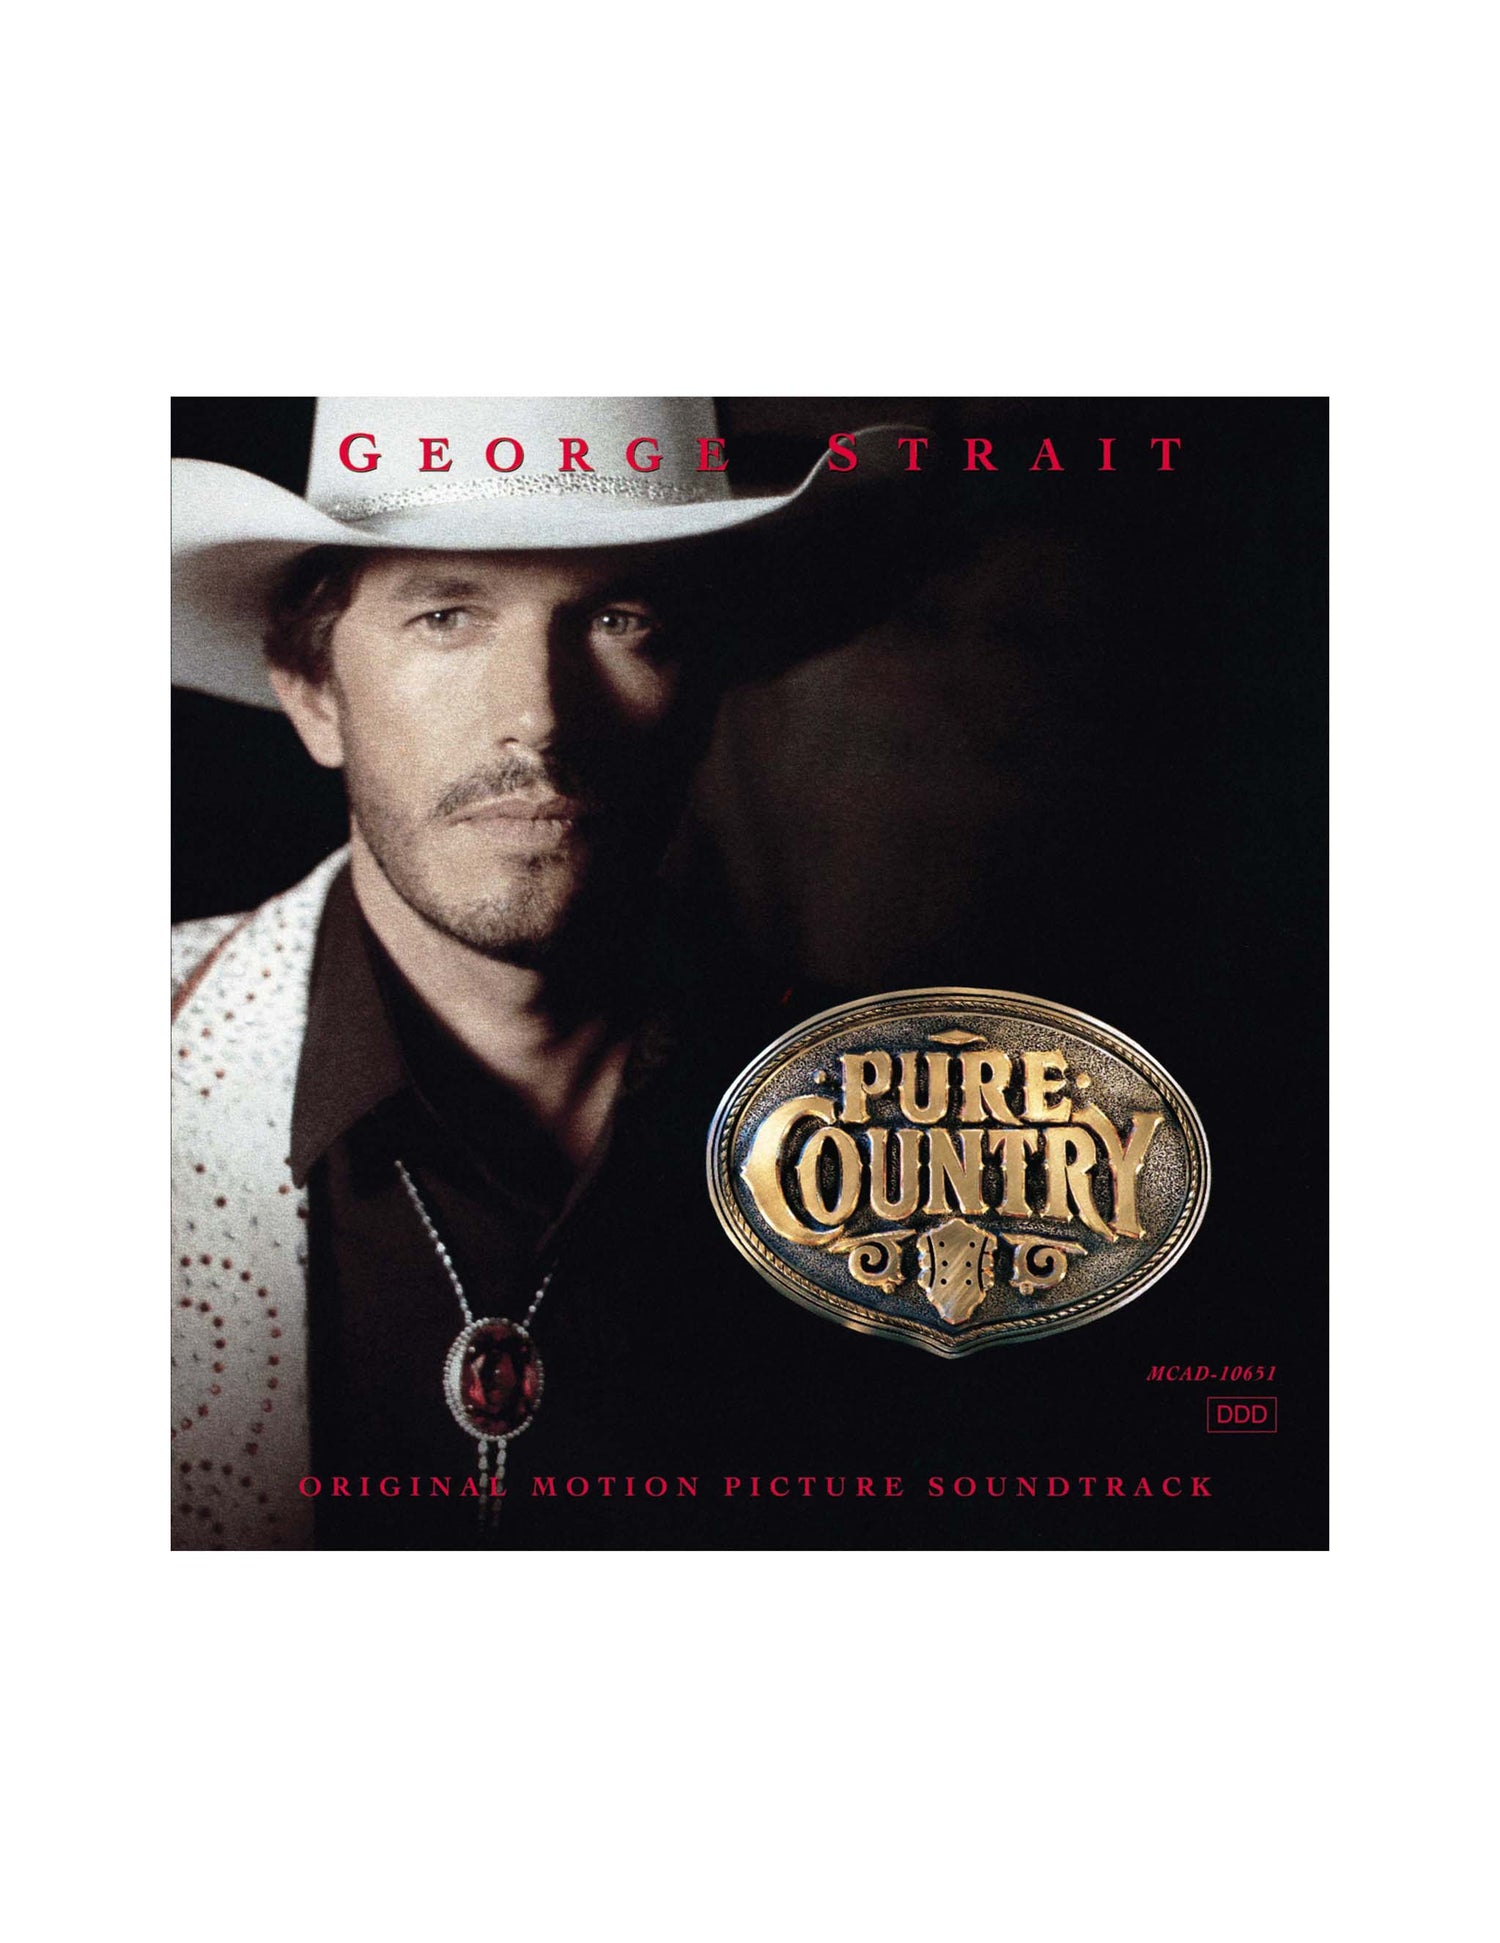 George Strait: Pure Country Soundtrack Limited Edition (LP)